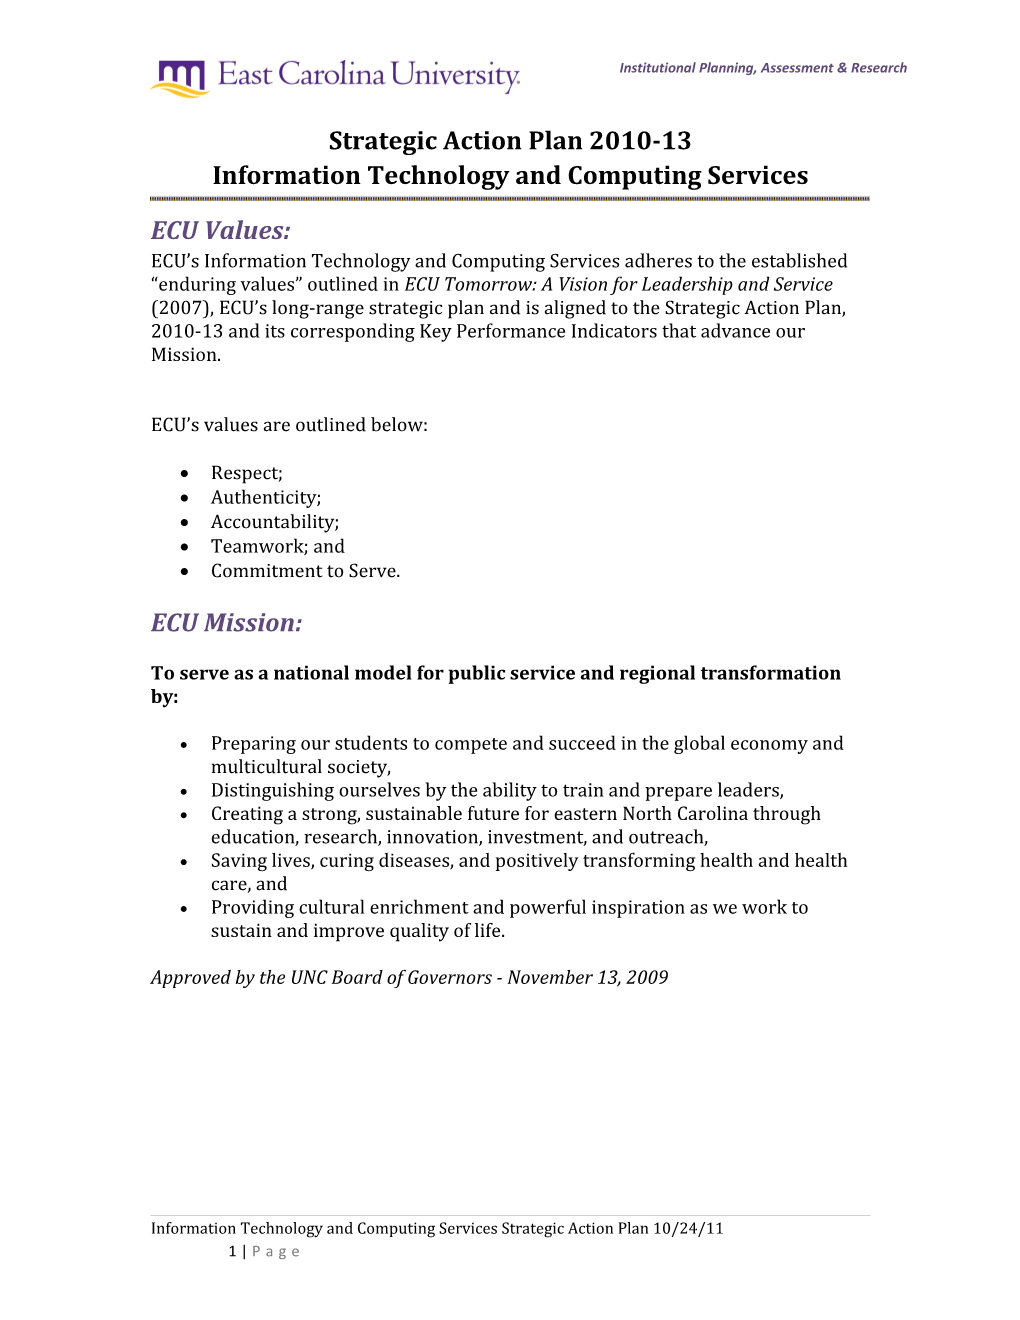 Information Technology and Computing Services